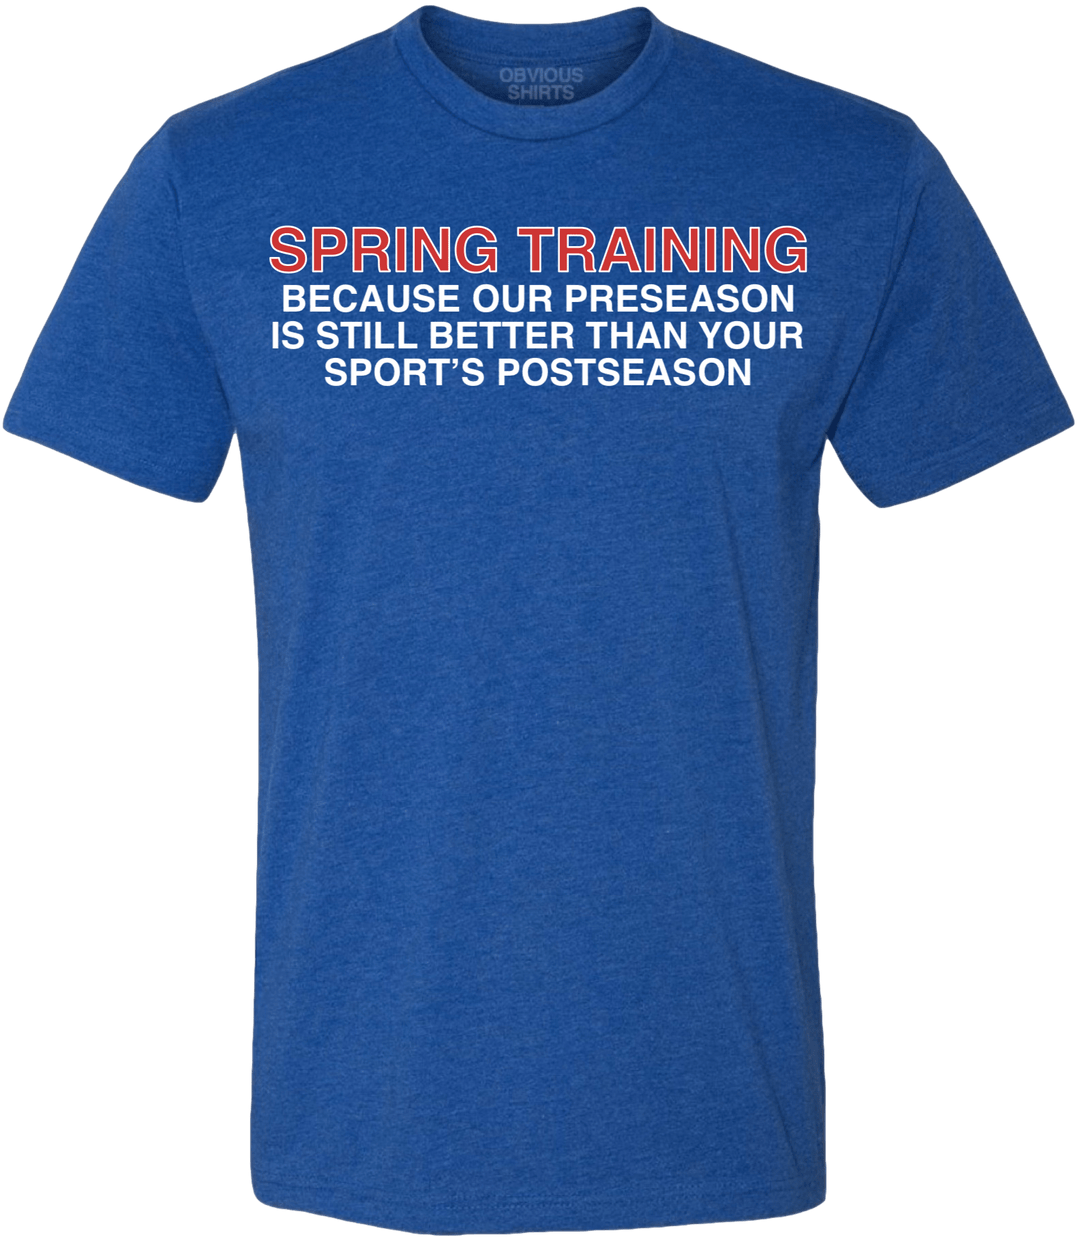 OUR PRESEAON IS STILL BETTER THAN YOUR SPORT'S POSTSEASON. - OBVIOUS SHIRTS